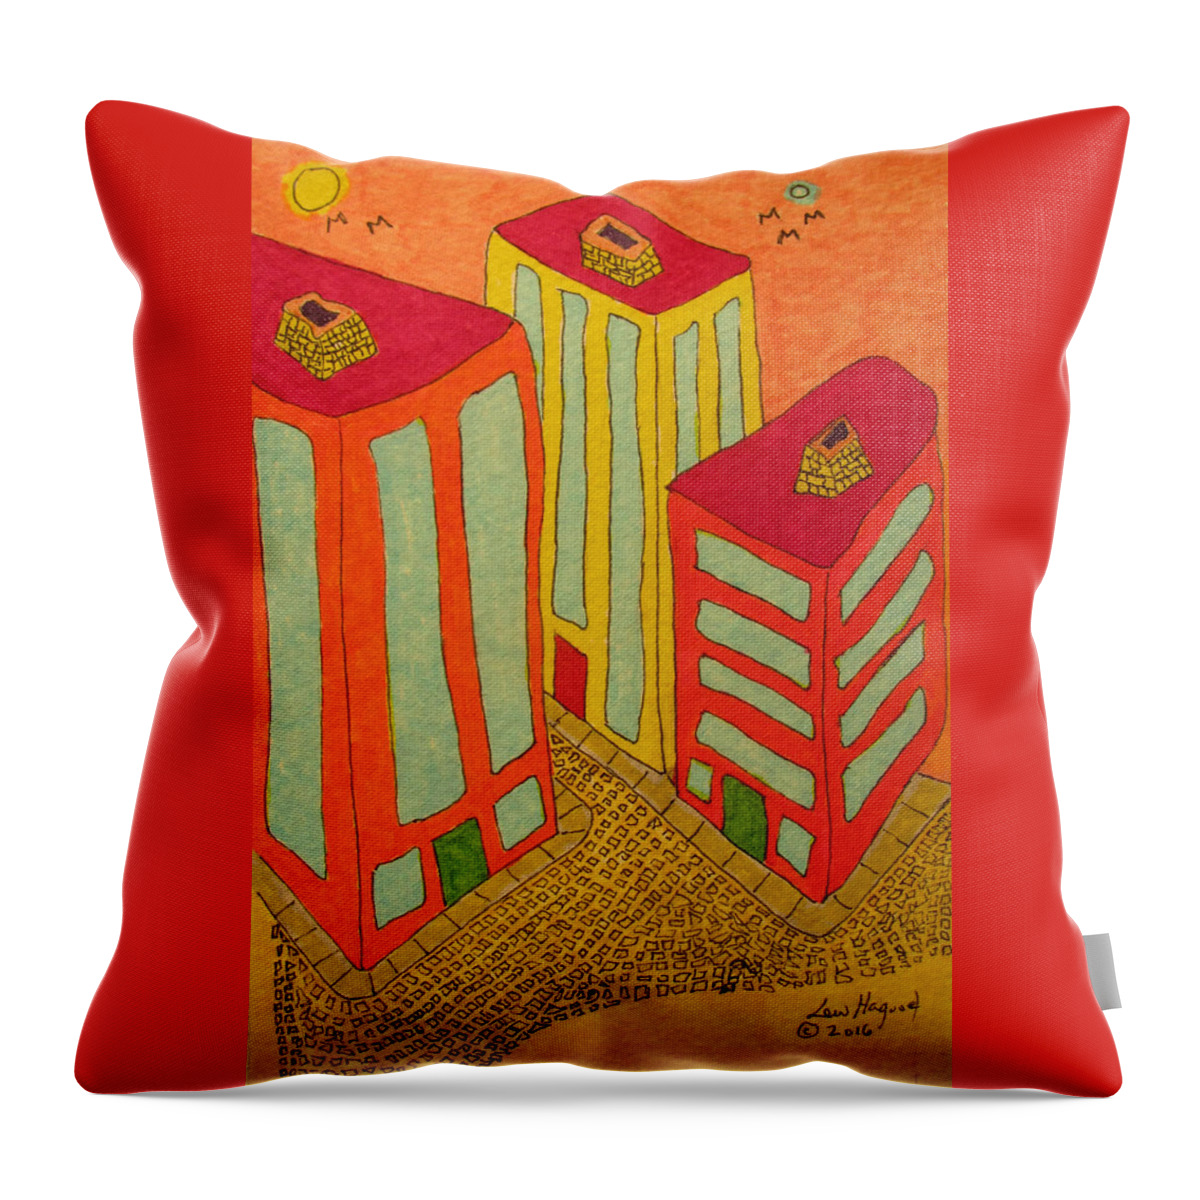 Hagood Throw Pillow featuring the painting Three Office Towers by Lew Hagood